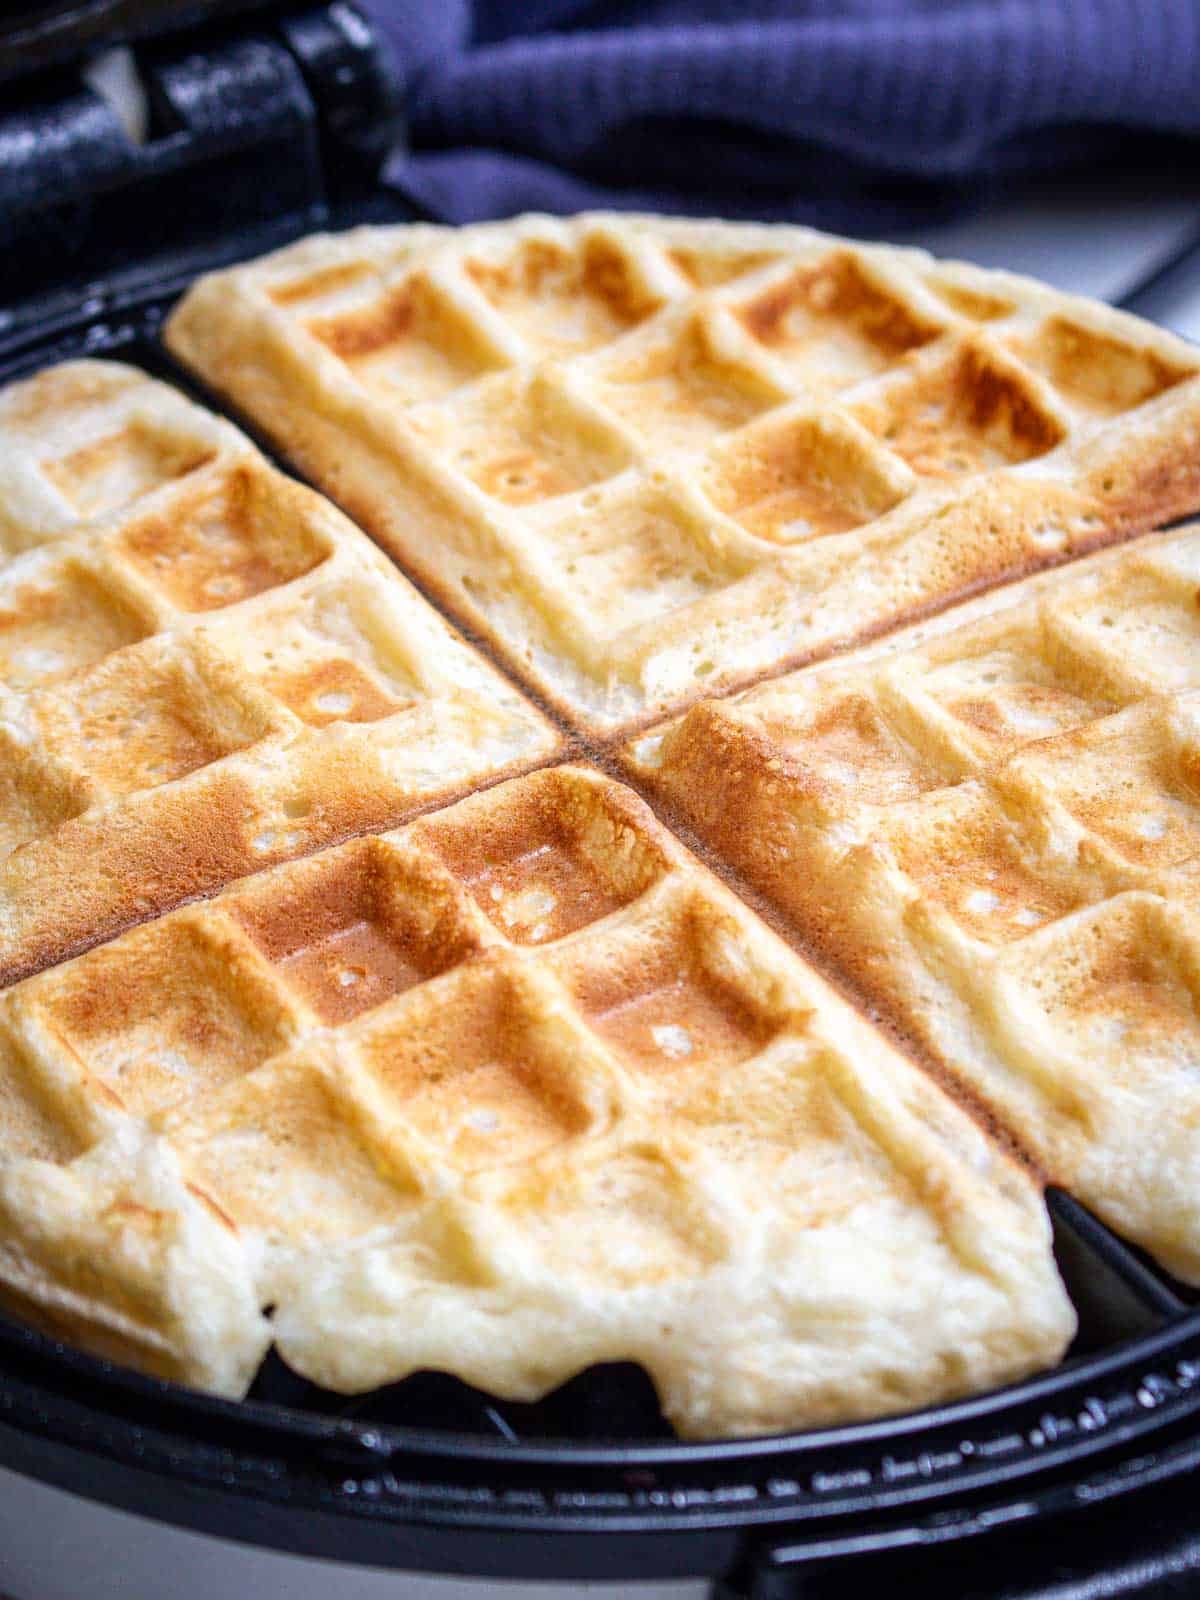 A homemade waffle ready to be taken out of the waffle iron.